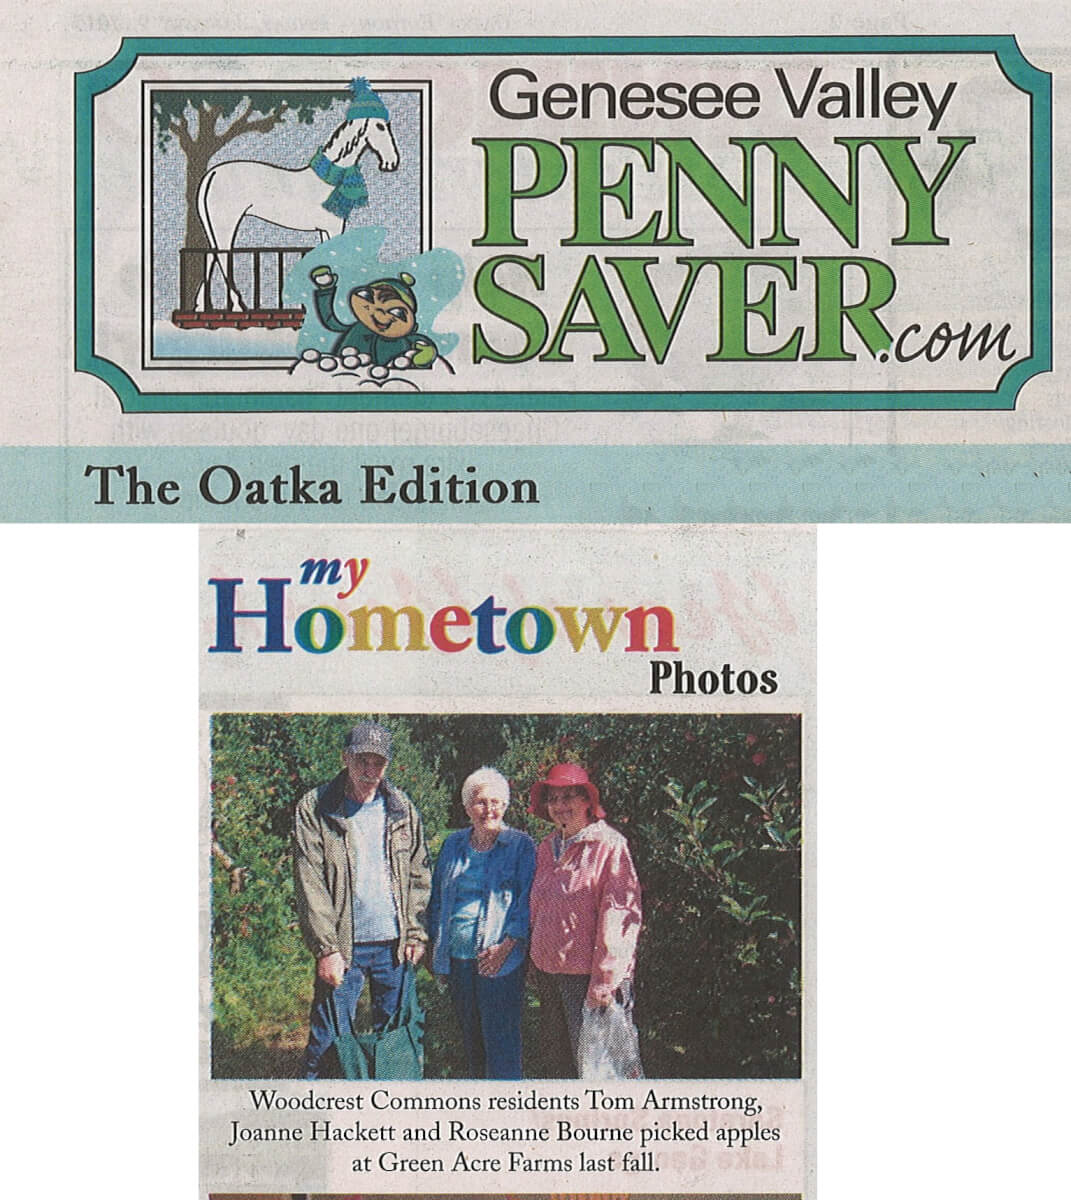 Woodcrest Commons Taste of Fall Photo in the Genesee Valley Penny Saver 